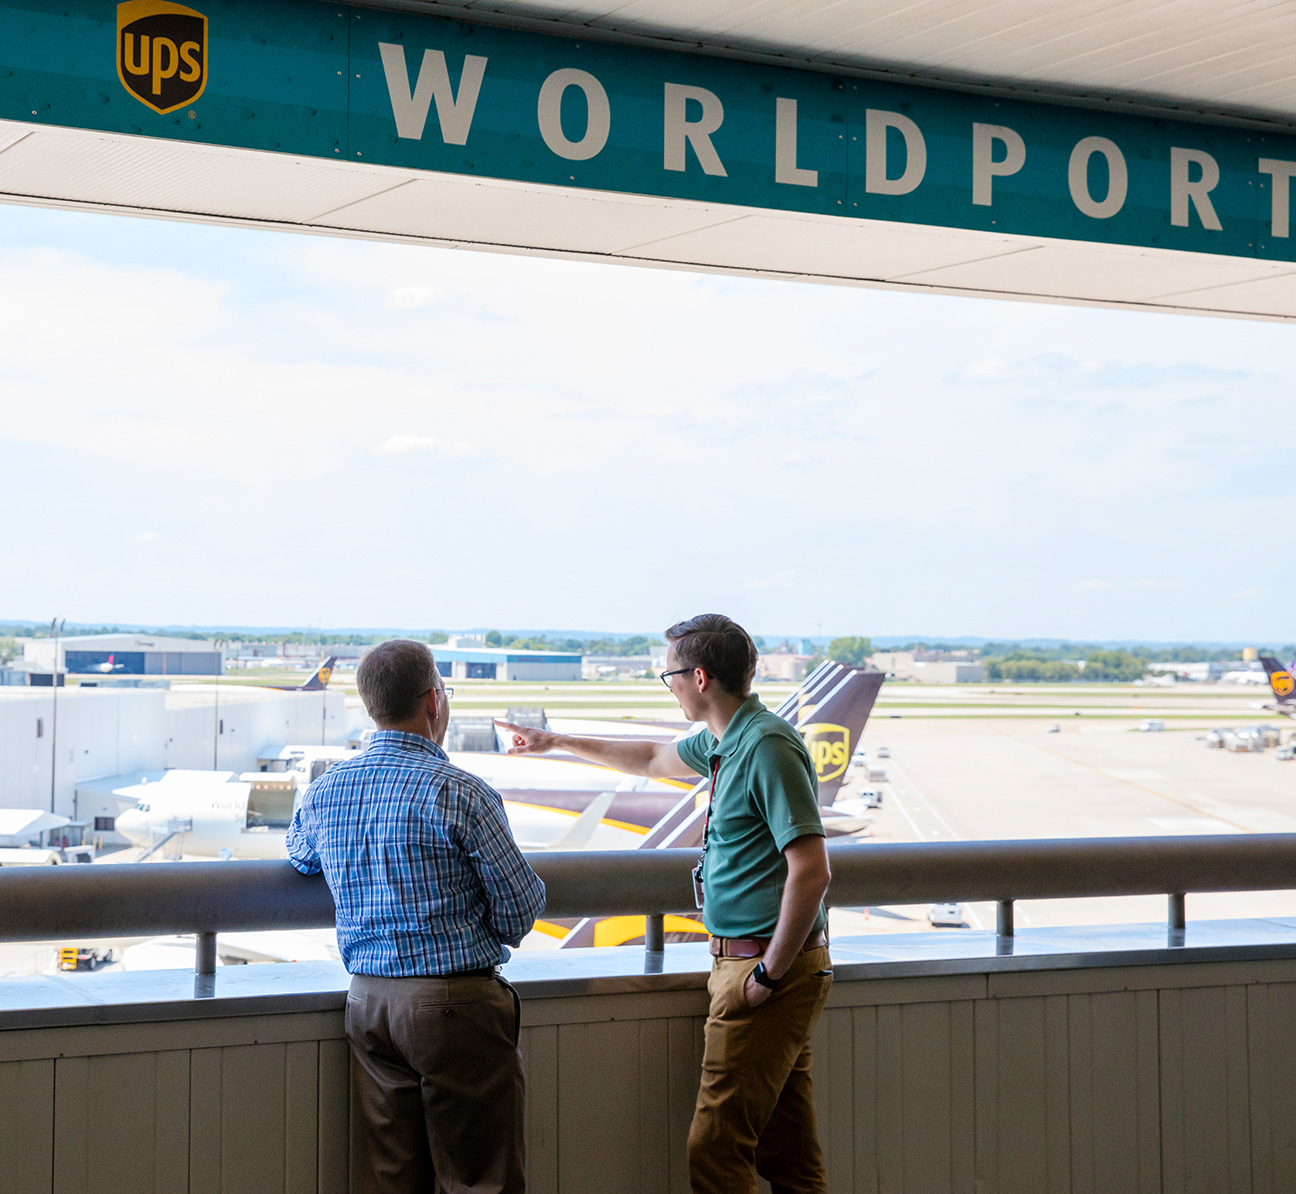 Two people standing below a Worldport sign and overlooking UPS planes